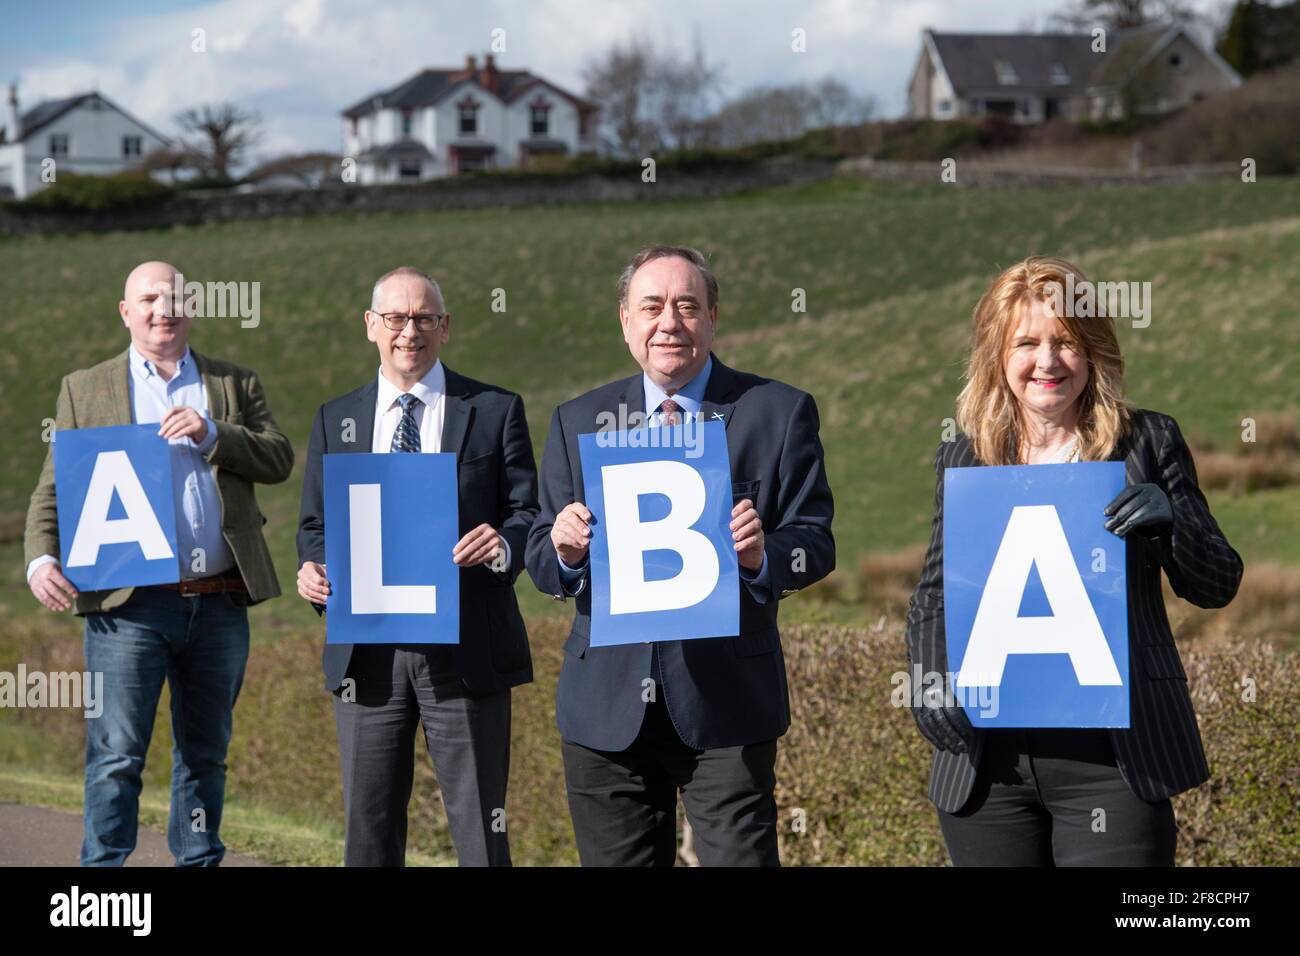 Stirling, Scotland, UK. 13th Apr, 2021. PICTURED: (L-R) Neale Hanvey MP; Jim Eadie; Rt Hon Alex Salmond; Eva Comrie. Alba Party Leader, Rt Hon Alex Salmond unveils his candidates for Mid Scotland and Fife region. Pic Credit: Colin Fisher/Alamy Live News Stock Photo